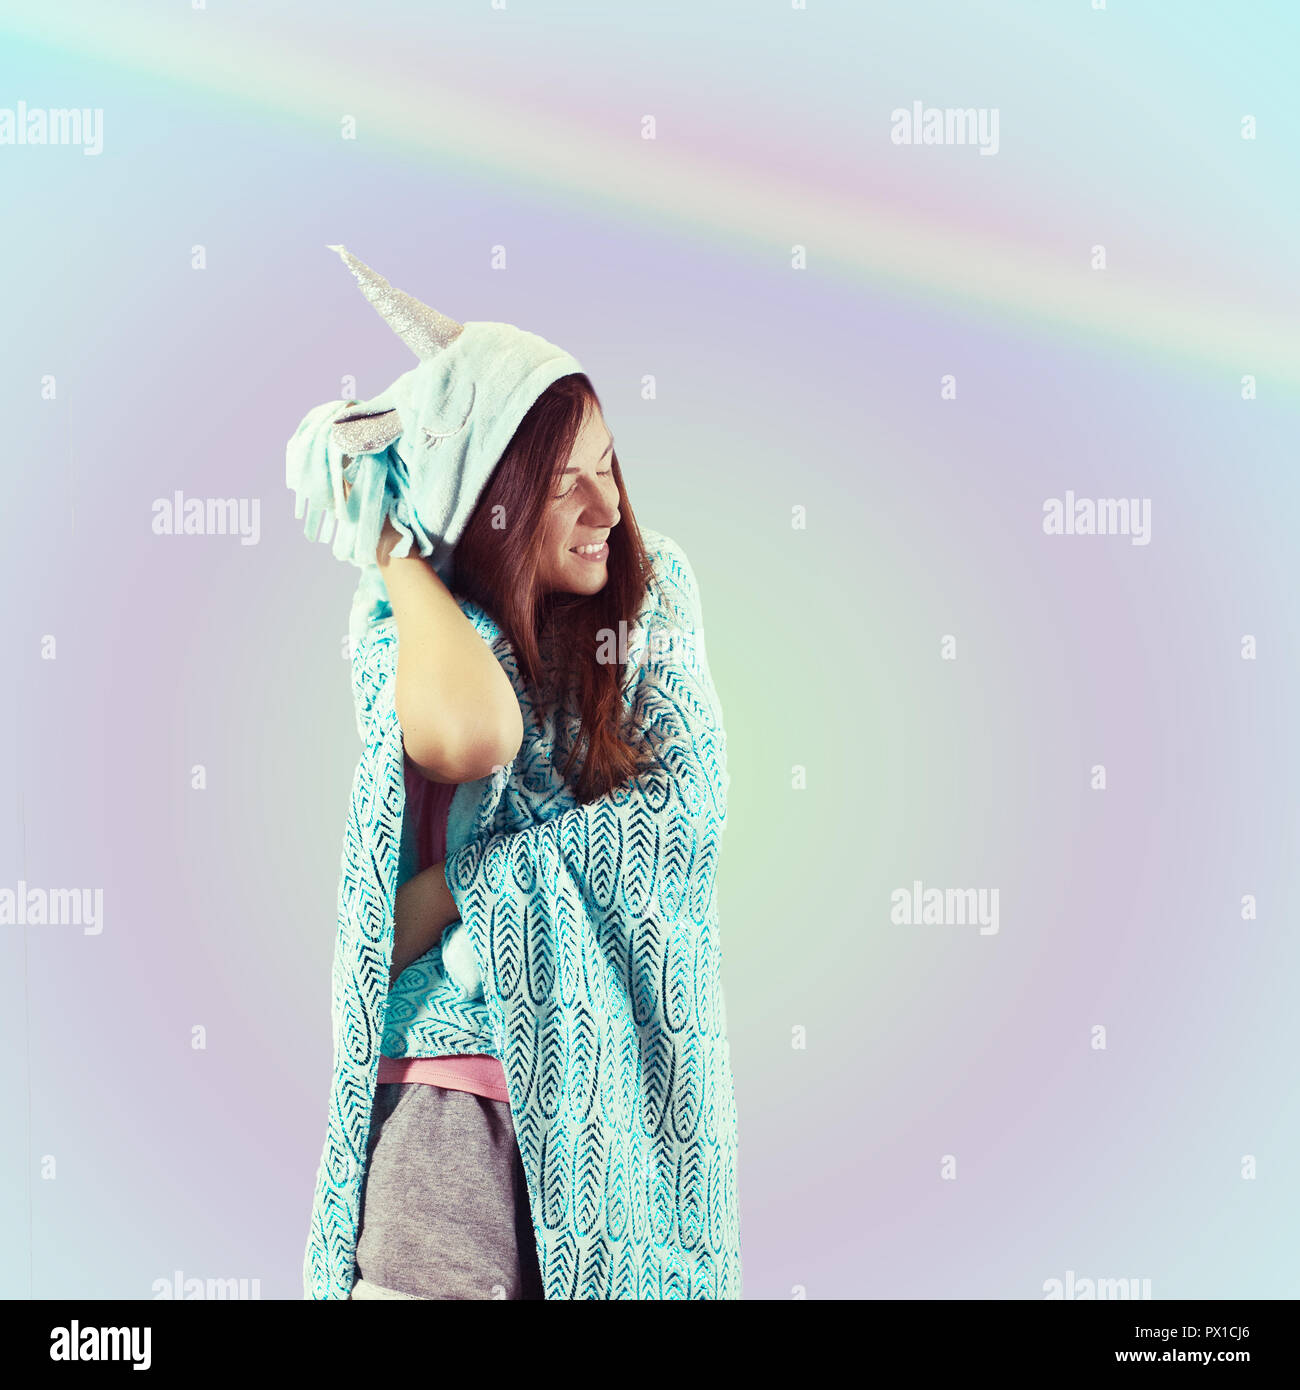 Girl in pajamas Unicorn. Candy party style Stock Photo